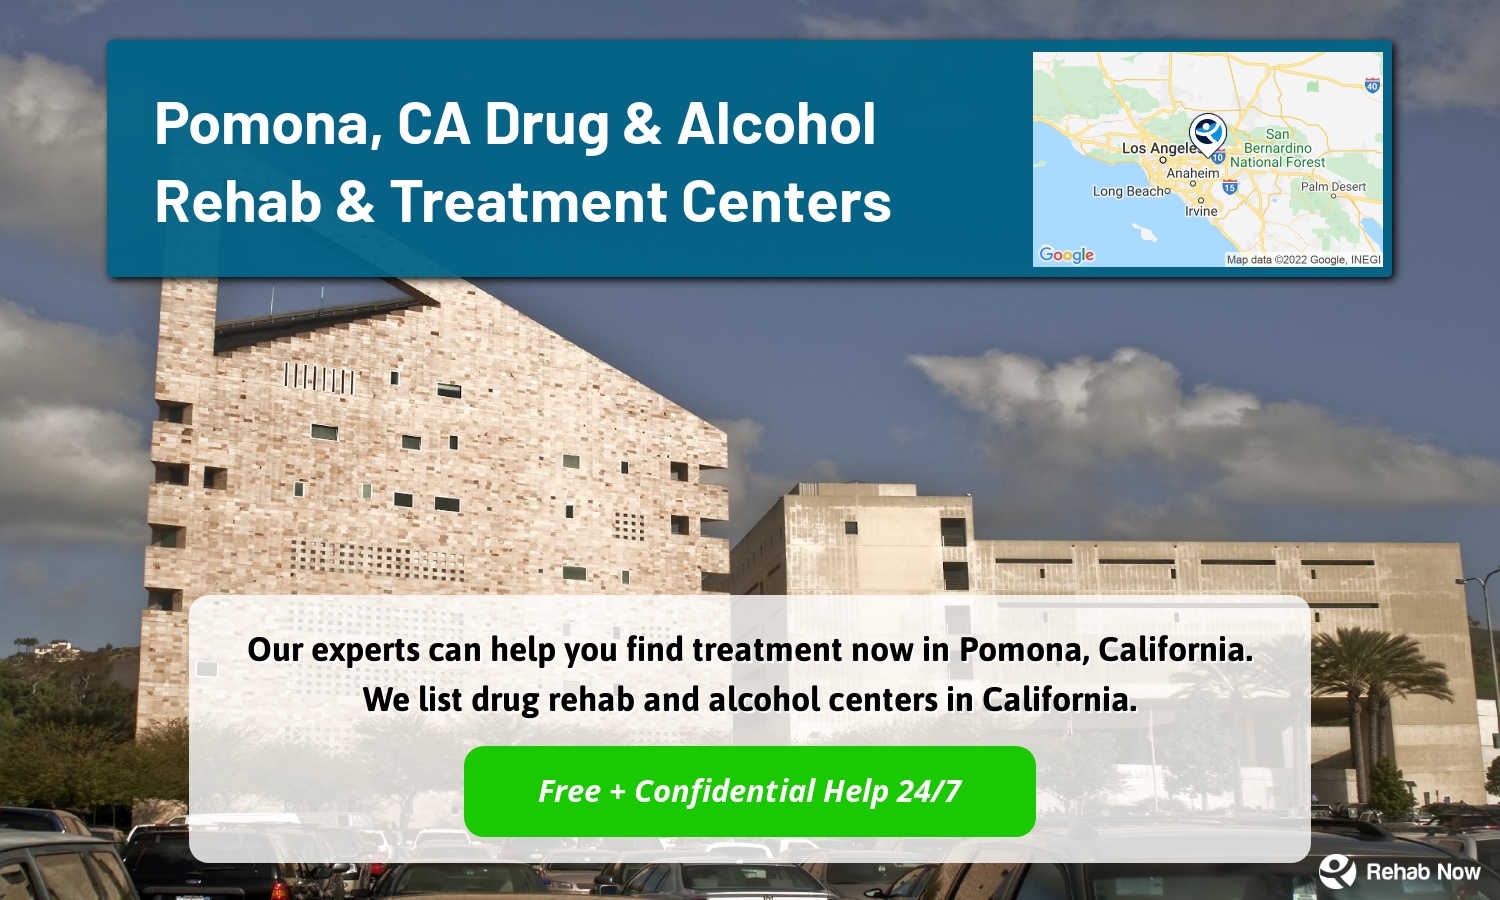 Our experts can help you find treatment now in Pomona, California. We list drug rehab and alcohol centers in California.